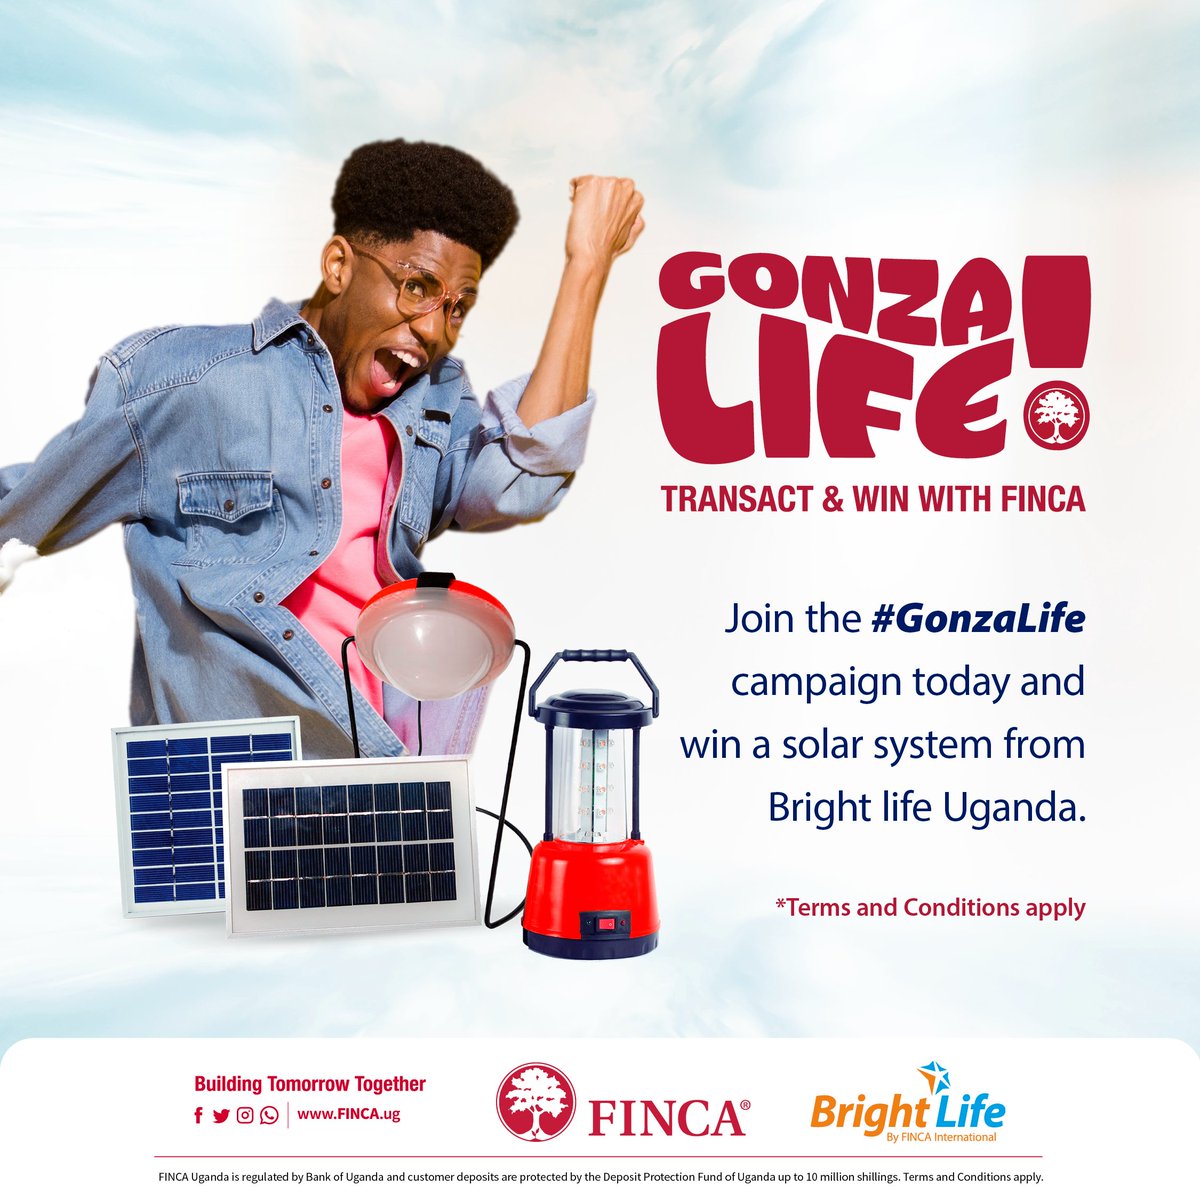 Start the new week in celebrations, #Gonzlife with FINCA Uganda. All you have to do is open an account with us, make over 6 transactions a week and stand a chance of winning goodies like smartphones, solar panels and motorcycles. Terms and conditions apply.